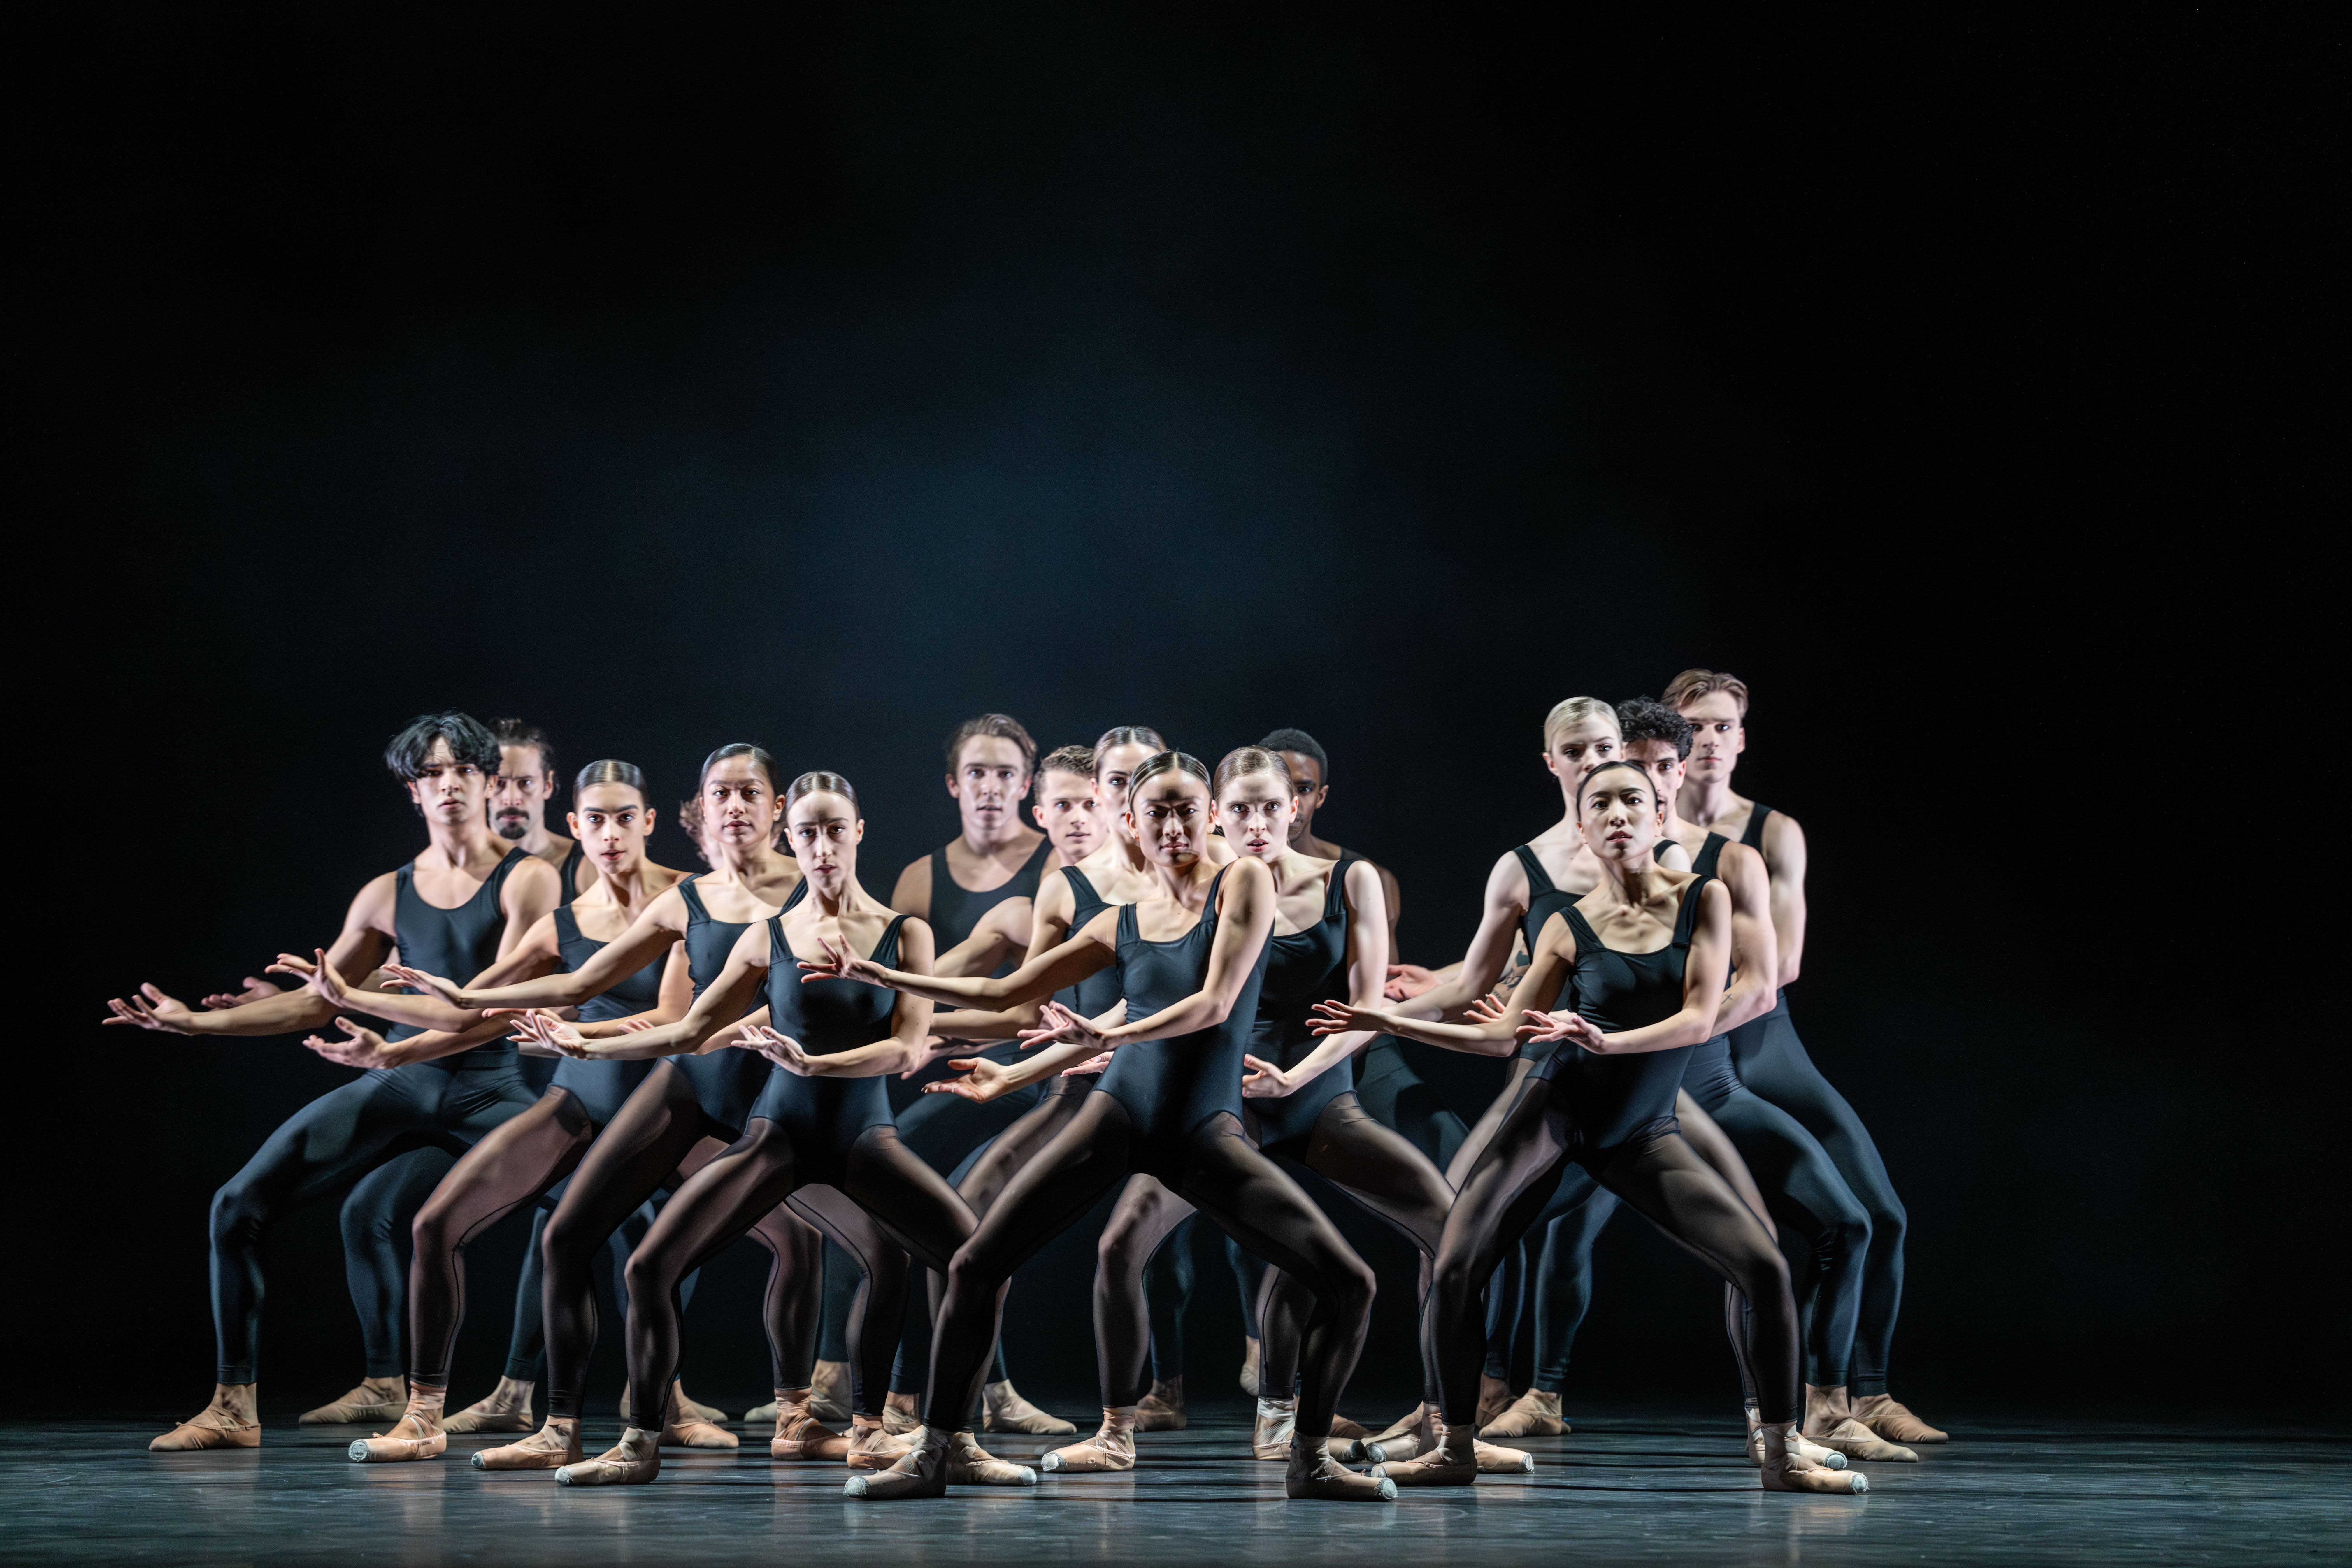 Acosta’s heavy metal ballet ‘Black Sabbath – The Ballet’, created in 2023 with Birmingham Royal Ballet, was a sell-out show at Sadler’s Wells with both dance and rock audiences